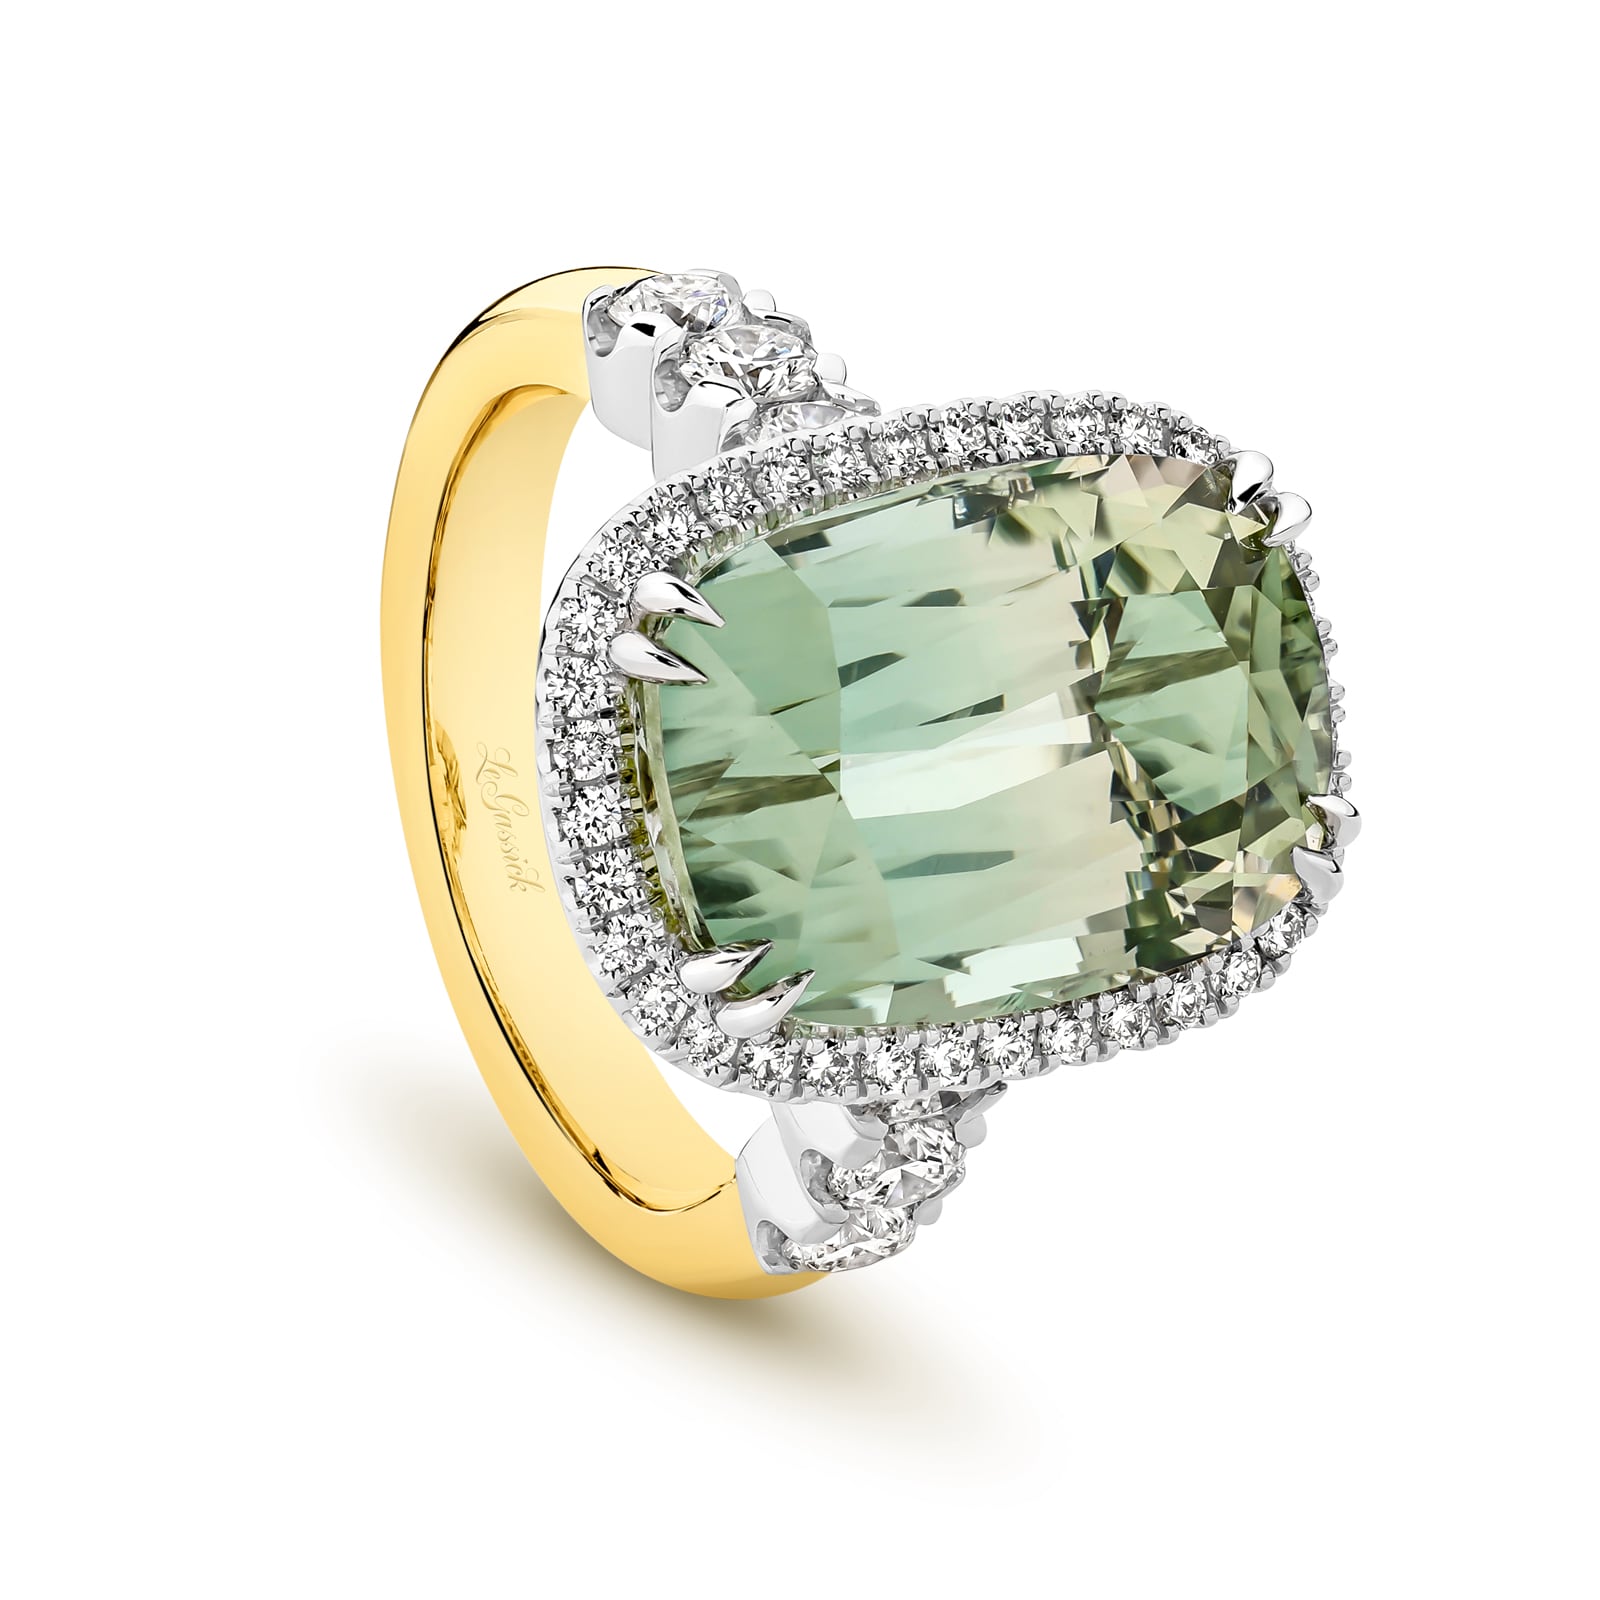 Asherah, a breathtaking 11.33ct natural green tourmaline and diamond ring. Part of the Beyond Luxury Collection by LeGassick.